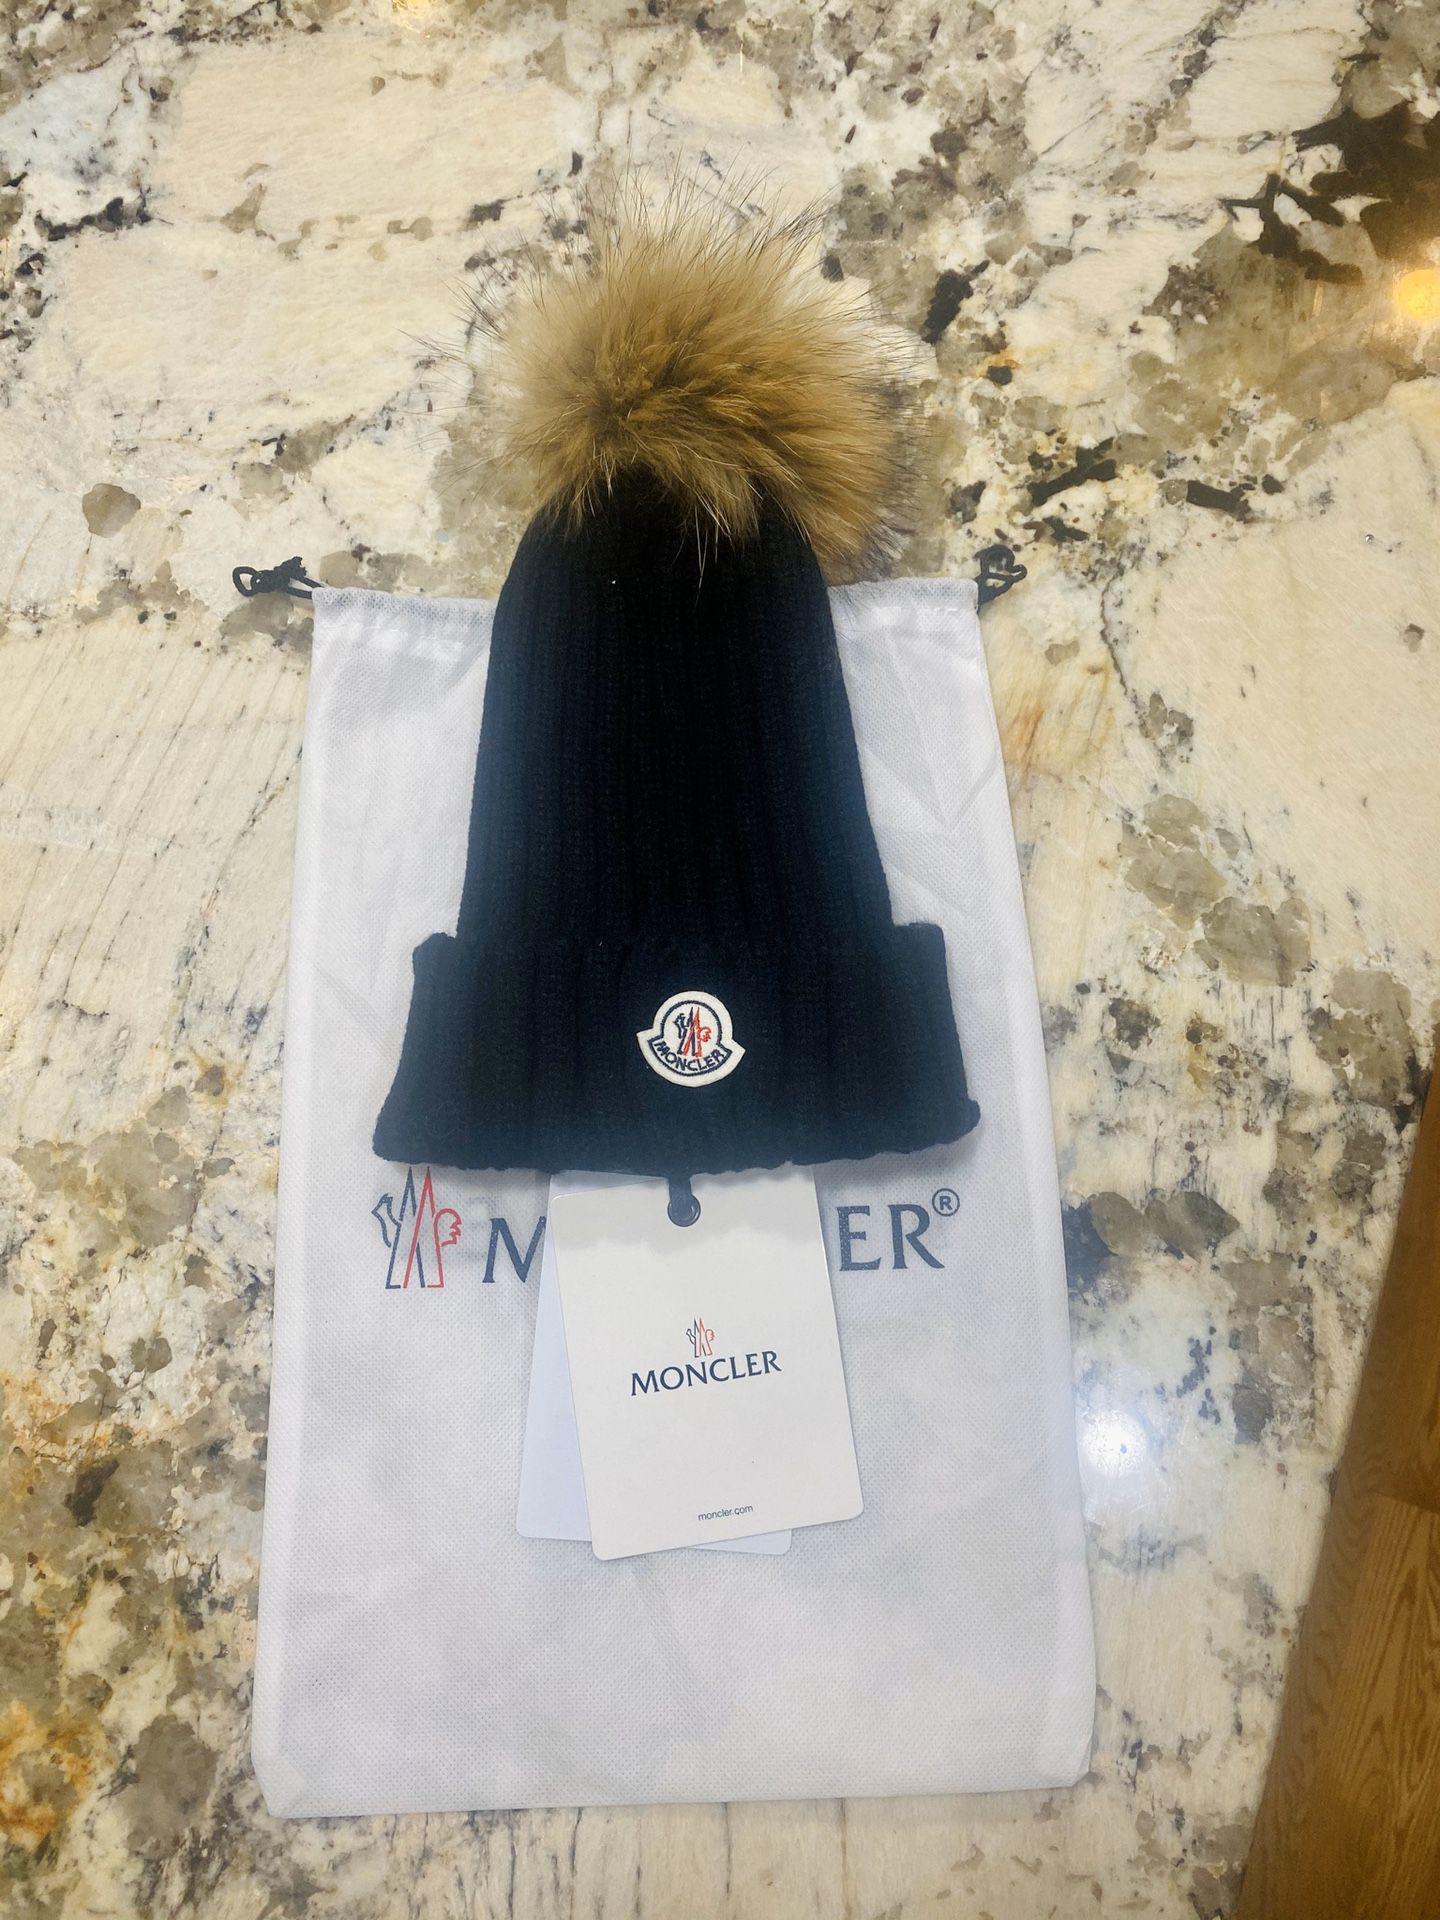 New Moncler hat real raccoon fur Pom